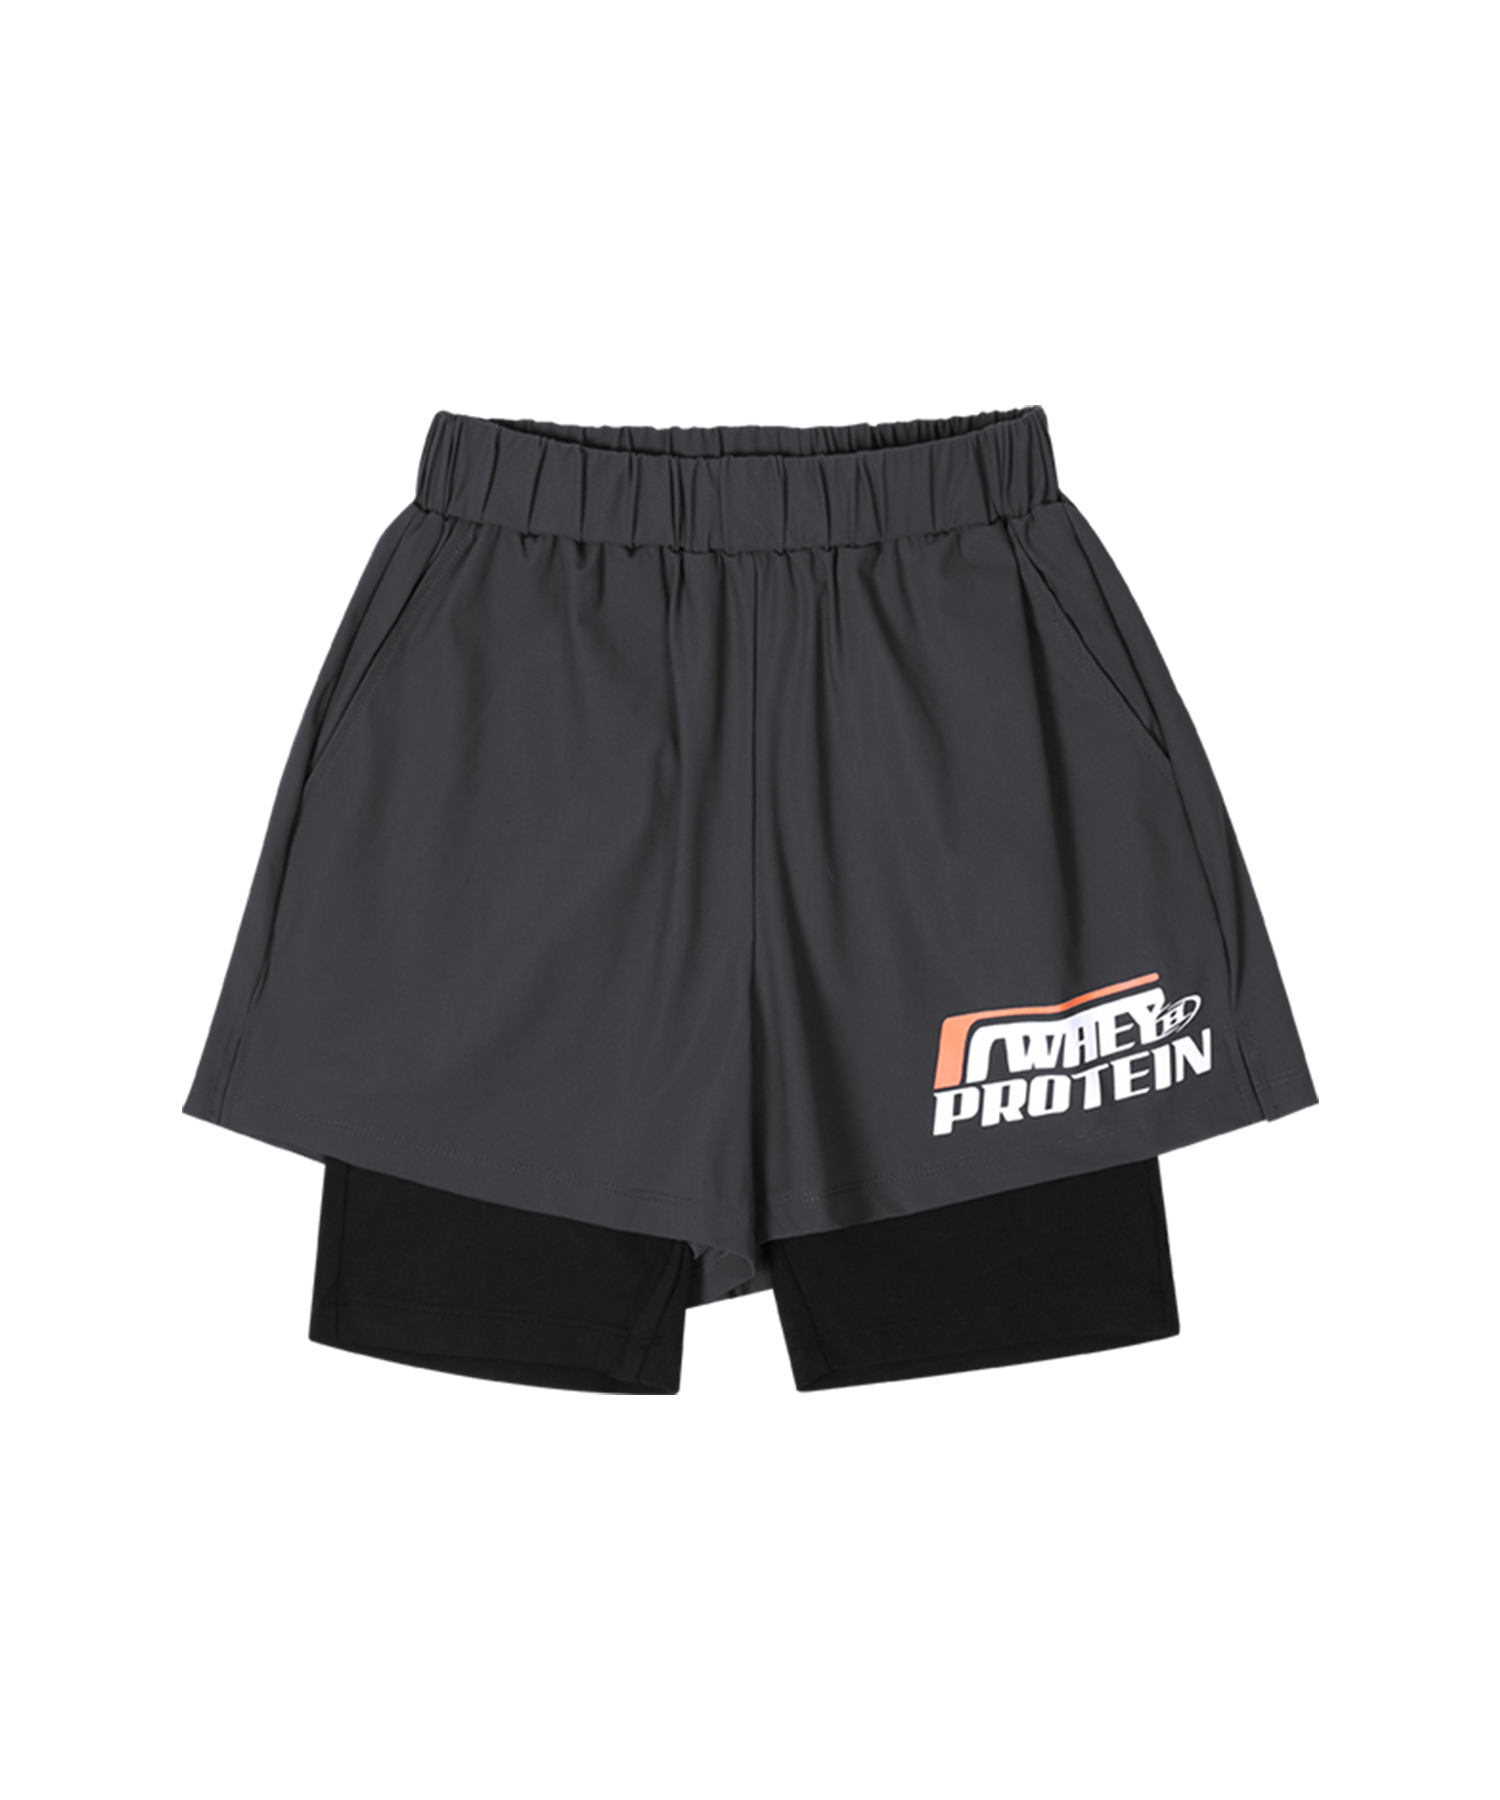 WHEY PROTEIN 2IN1 HALF PANTS [CHARCOAL]